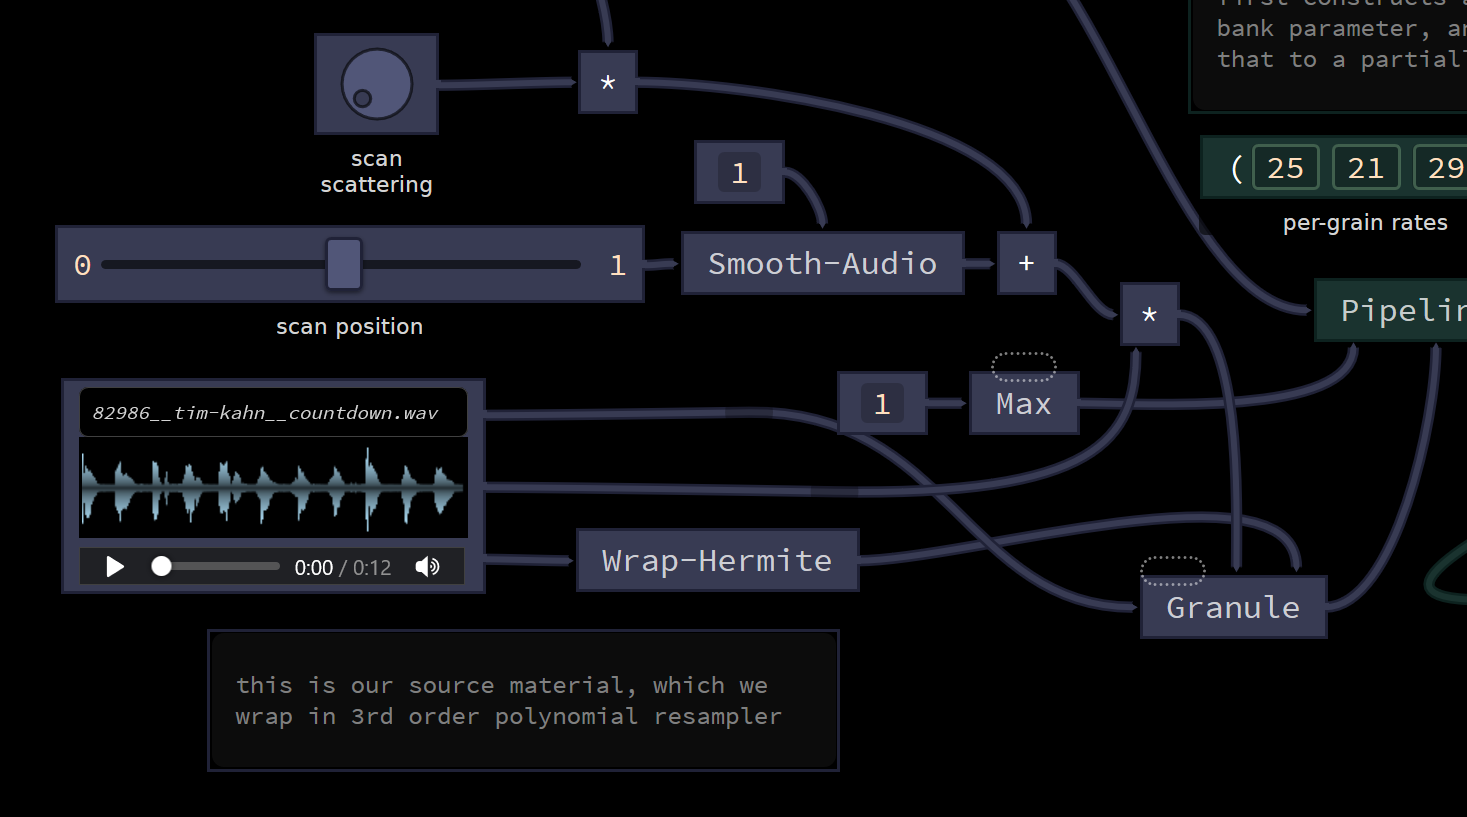 Extract from the granular synthesis patch